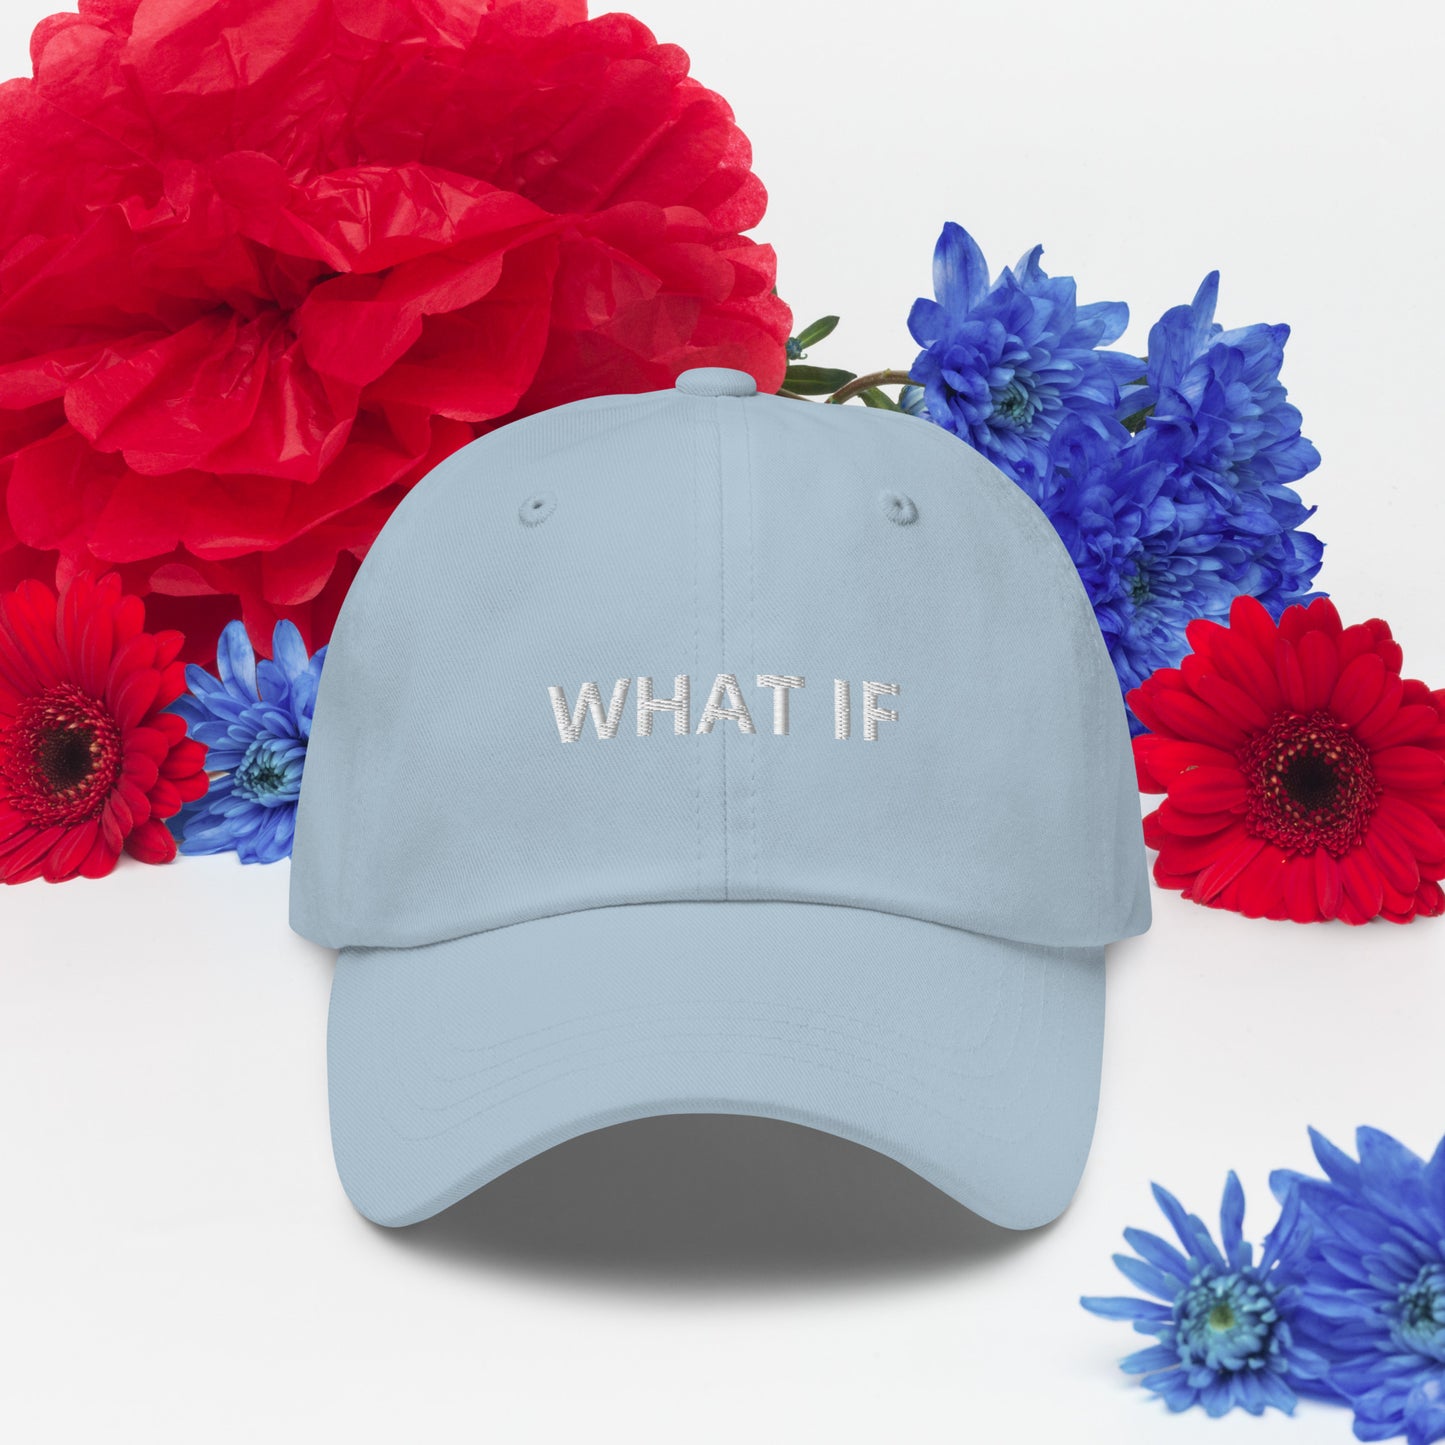 WHAT IF  hat